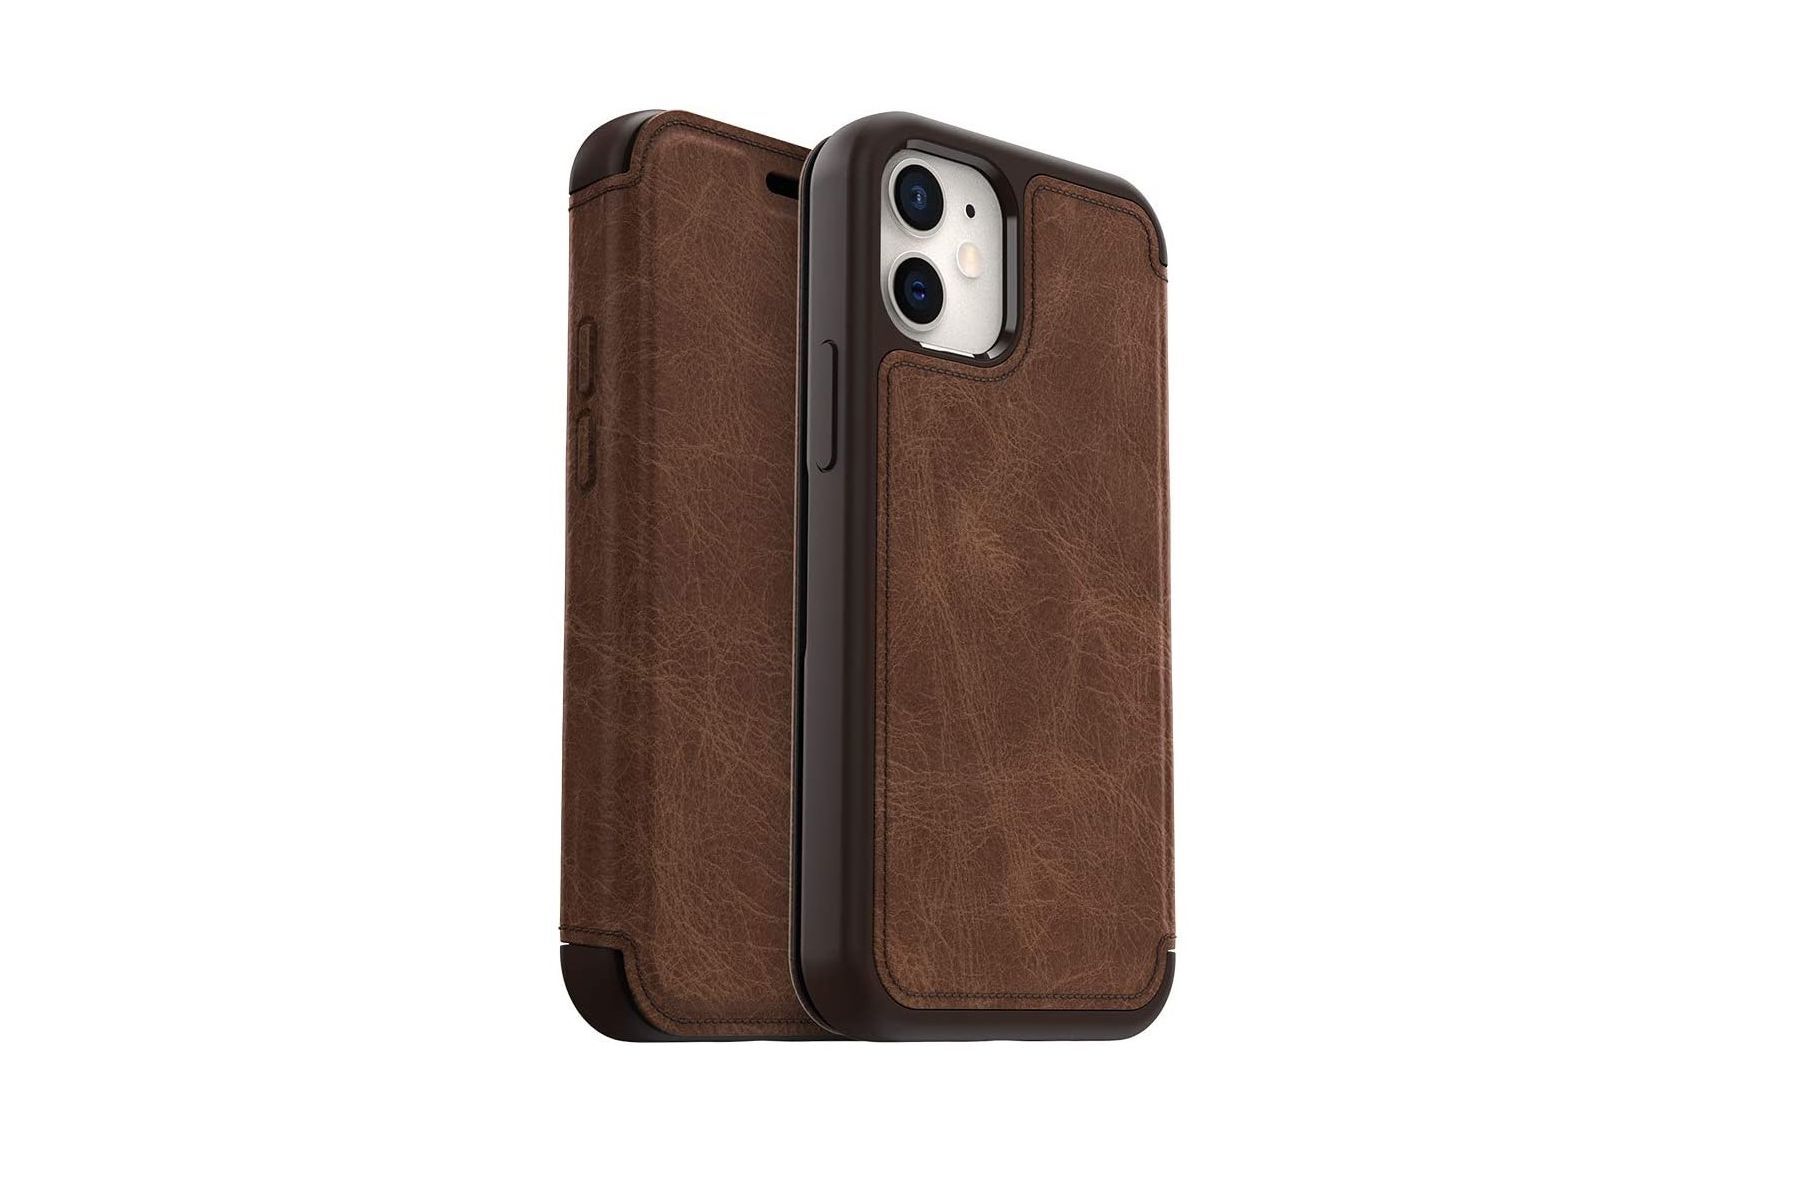 OtterBox Strada Series iPhone 12 mini case - The best iPhone 12 mini cases you can get - updated July 2022